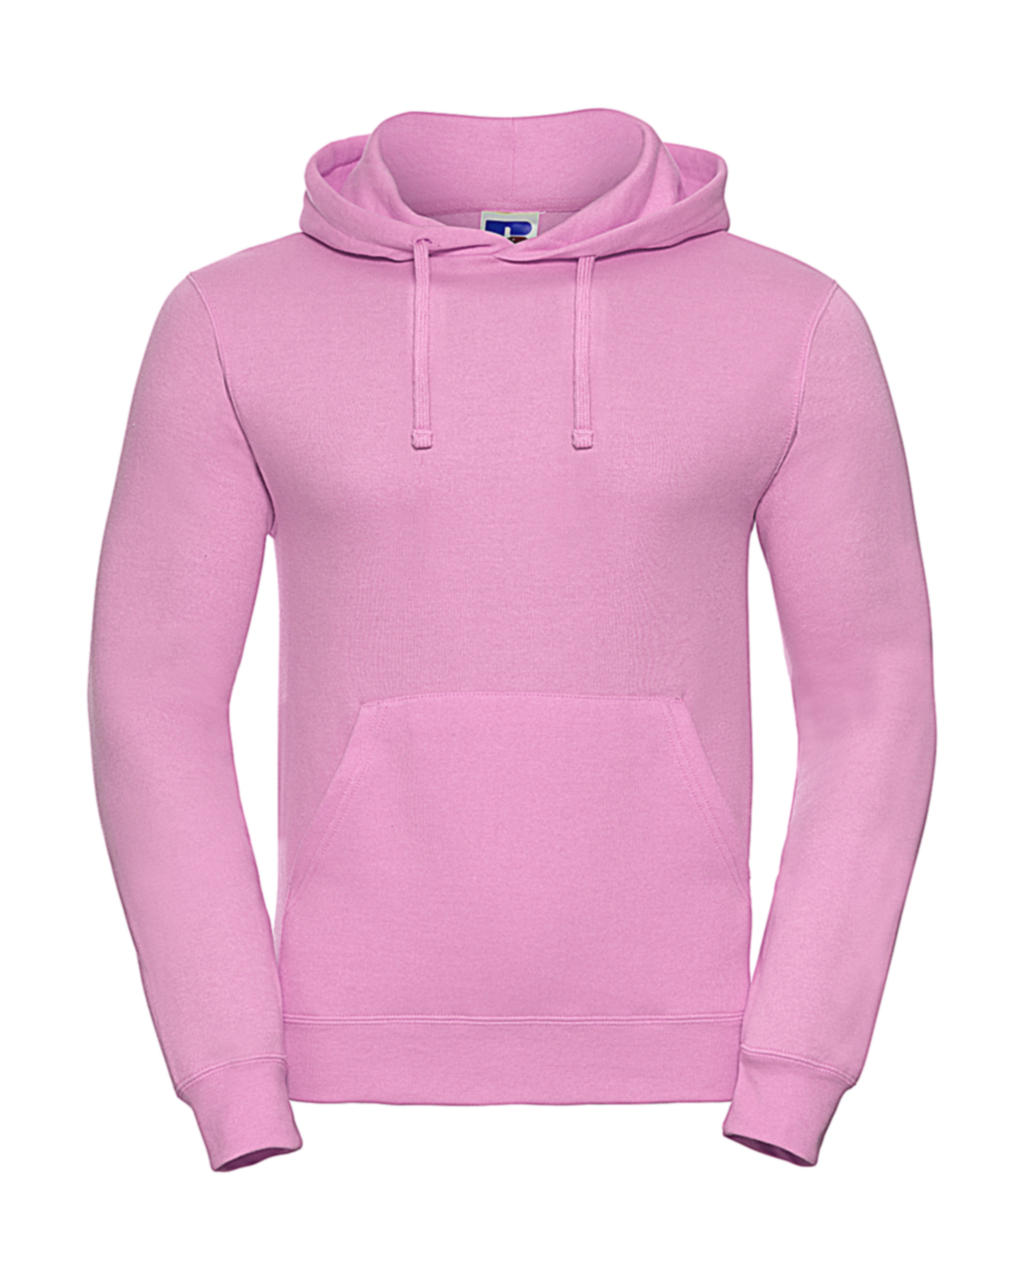  Hooded Sweatshirt in Farbe Candy Pink